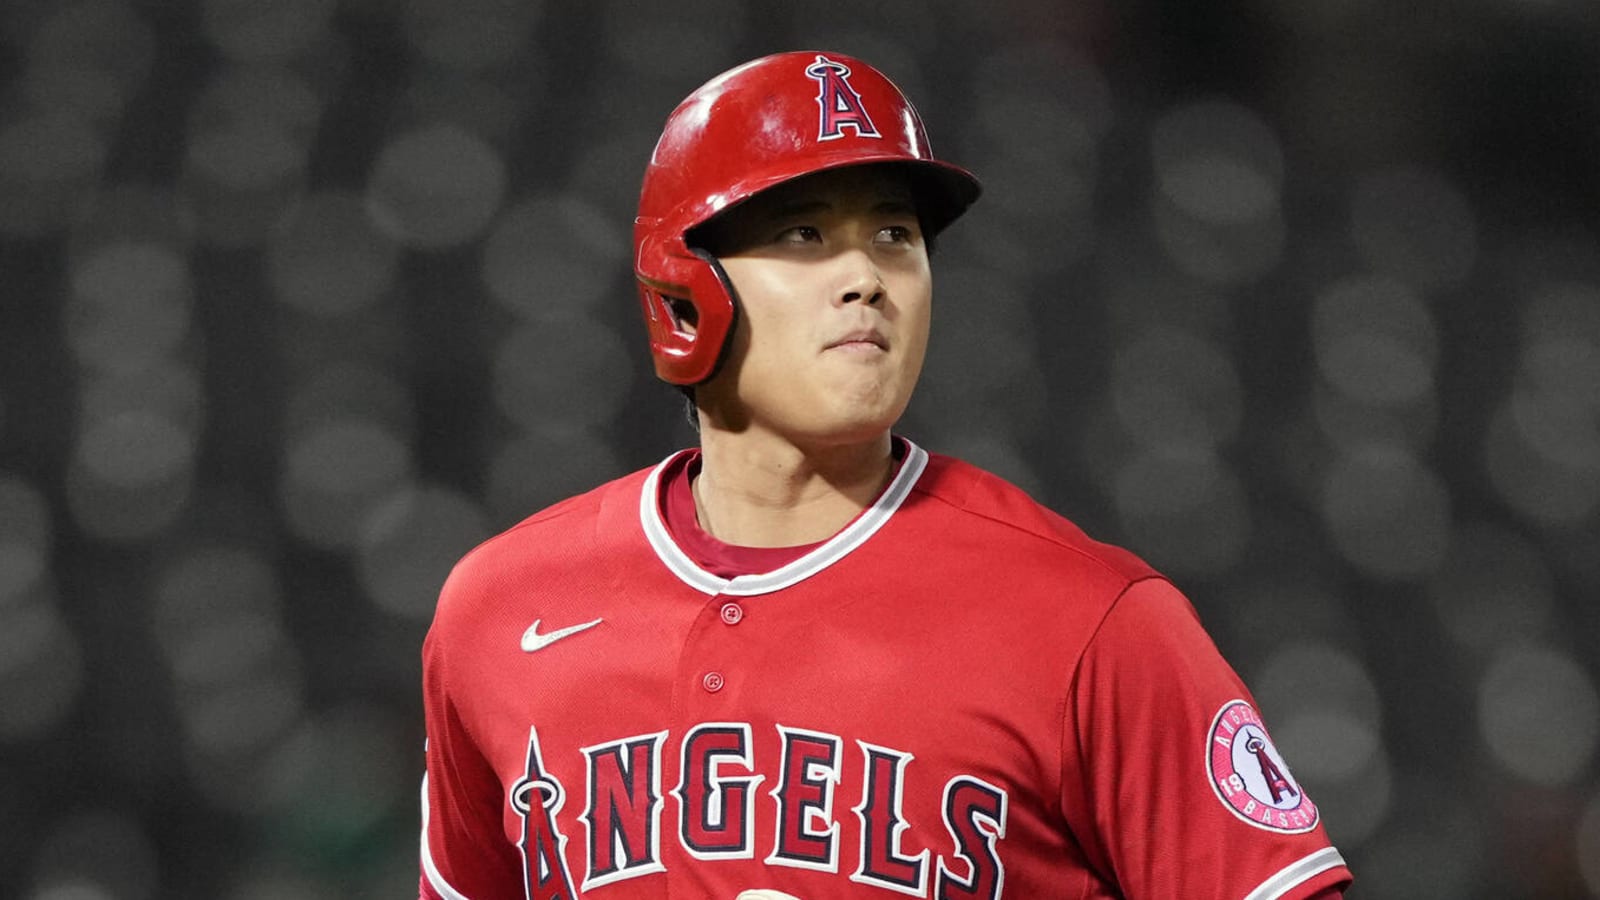 The only way to close out a historic season. Shohei Ohtani is your  unanimous 2021 American League MVP!